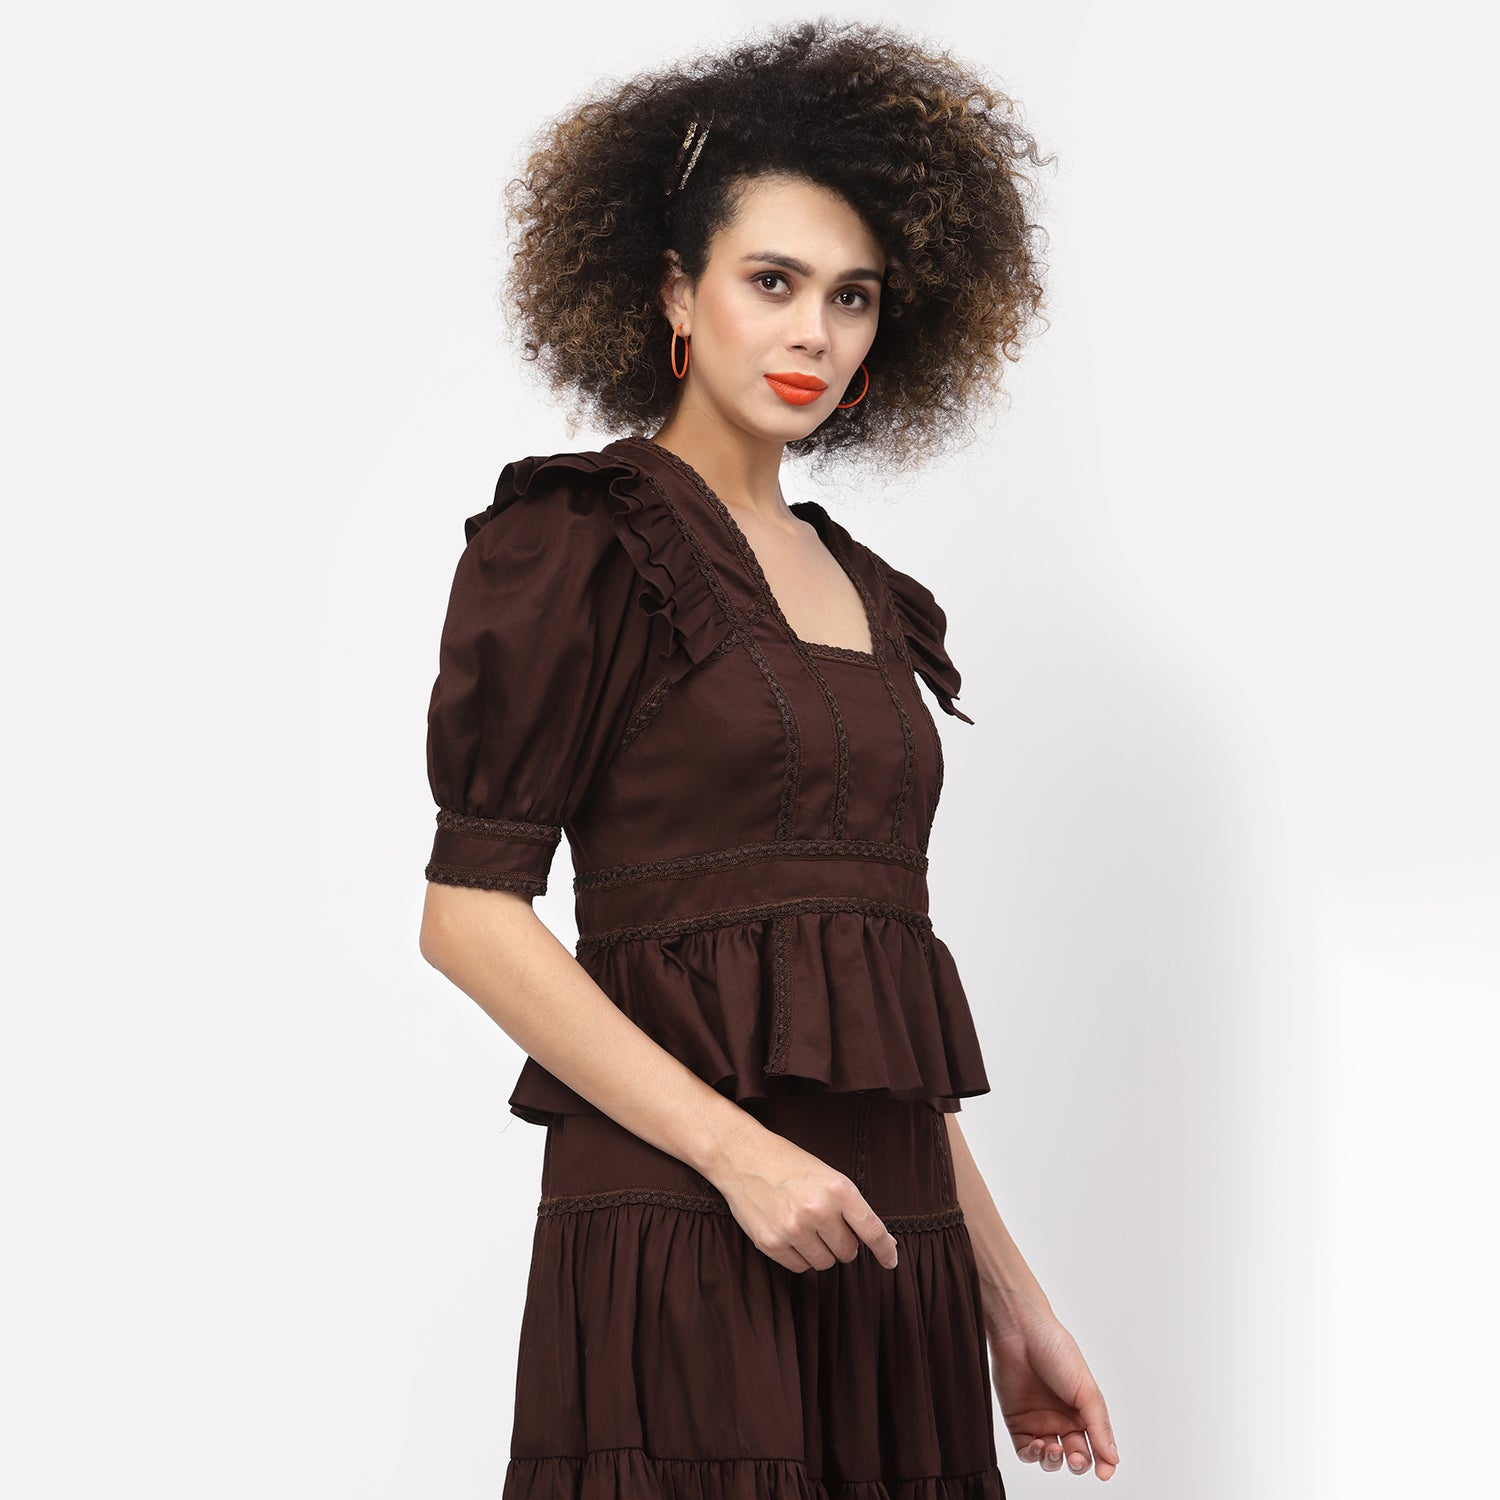 Brown Chocolate Peplum Top With Laces